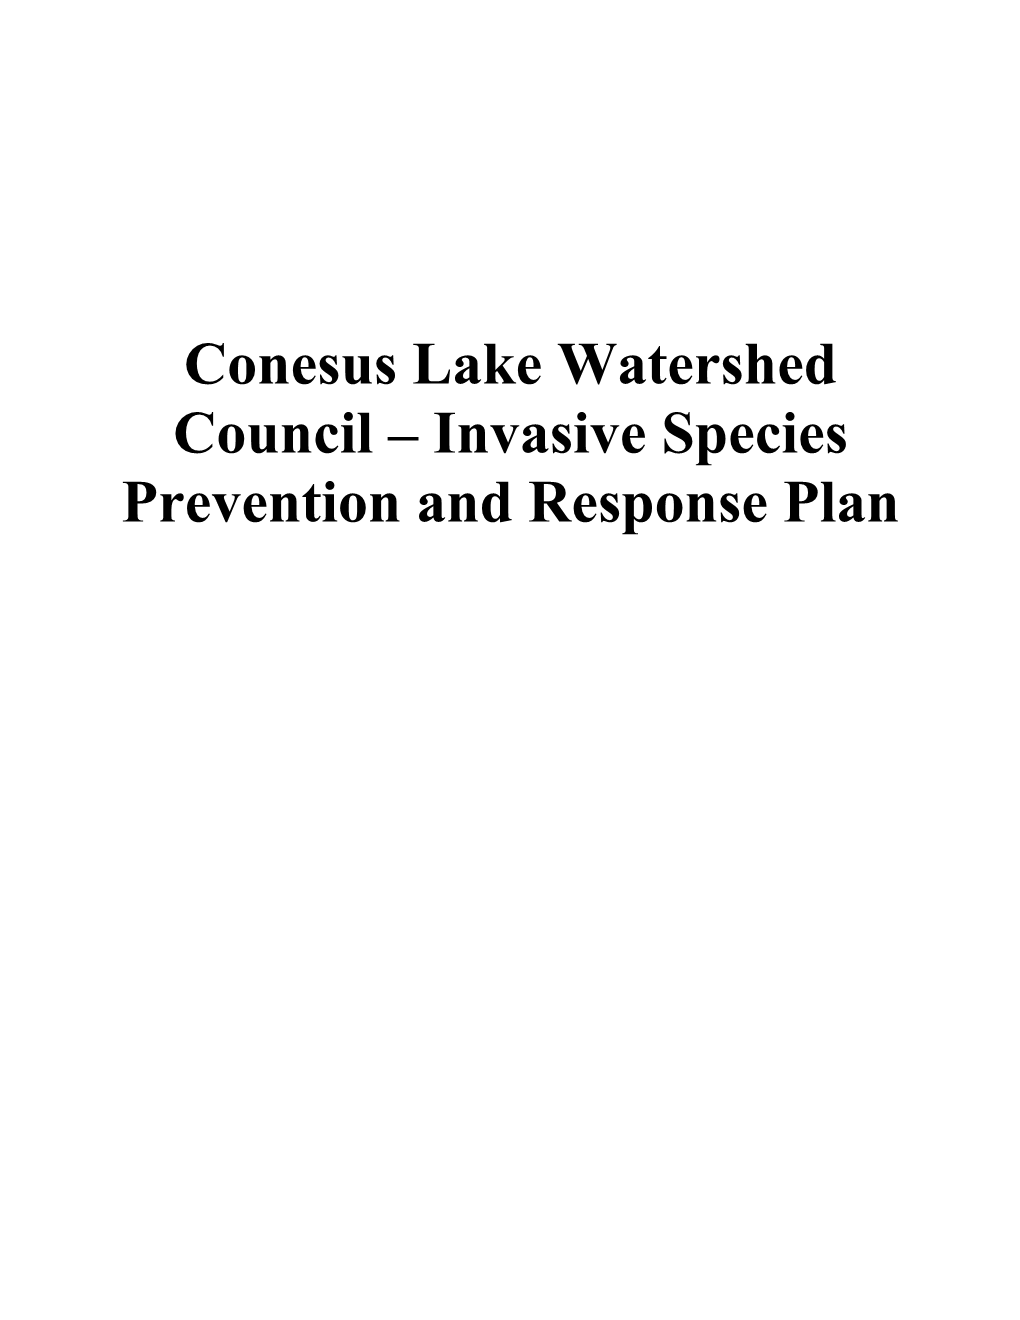 Conesus Lake Watershed Council – Invasive Species Prevention and Response Plan